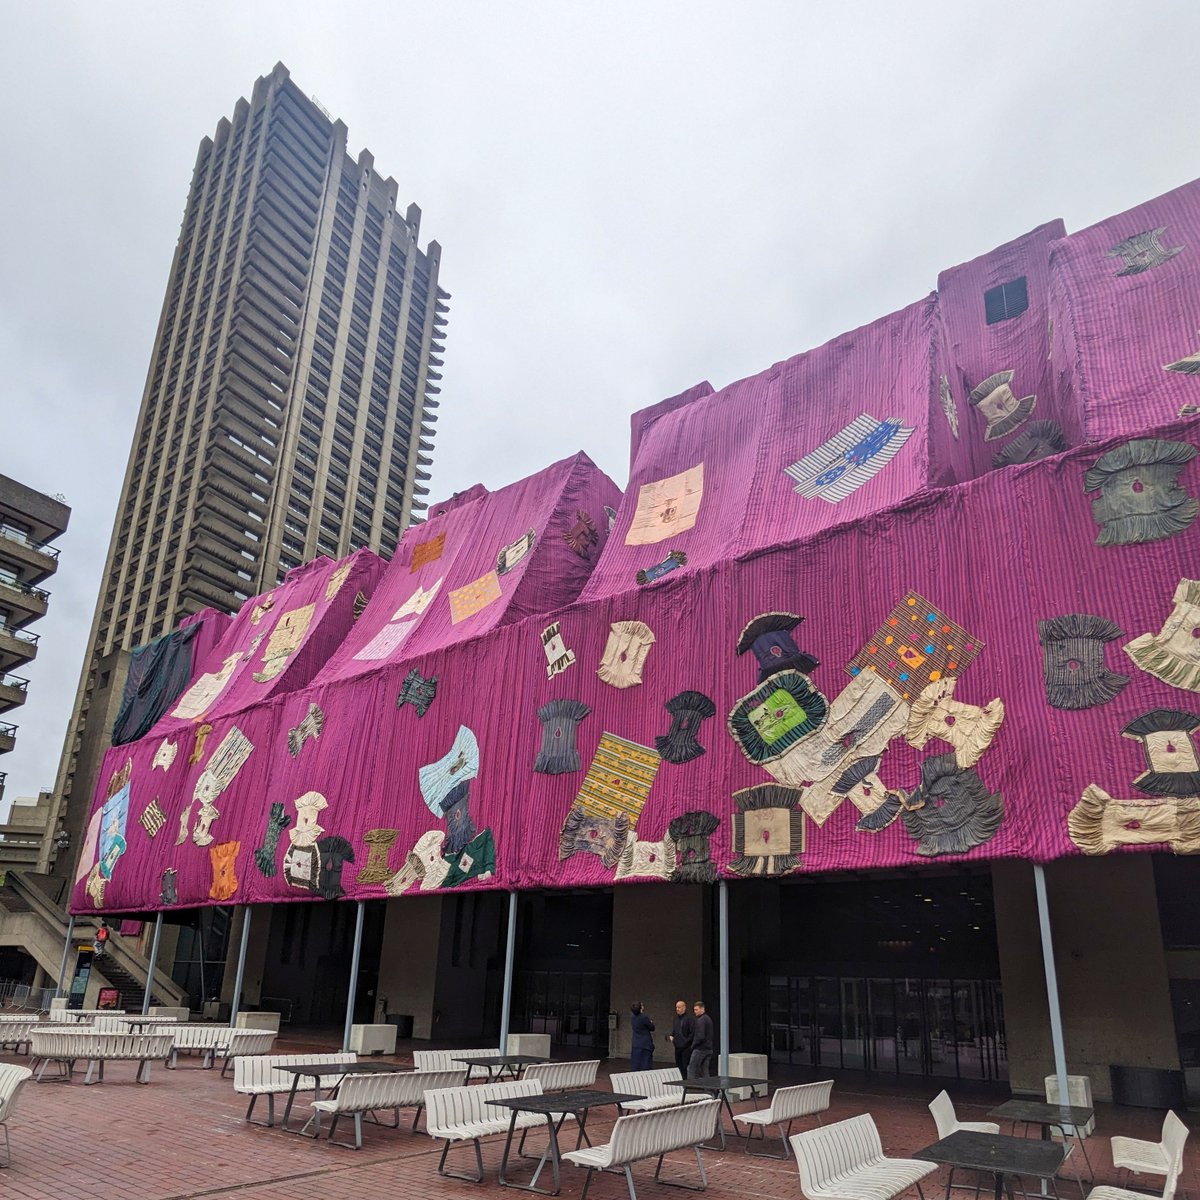 A chunk of Barbican has been covered in pink and purple by Ibrahim Mahama’s ambitious new installation, woven from traditional Northern Ghanaian robes - all woven by hand and covering an area of 2000 square metres. It will remain in place until 18th August.
#ThingsToSeeInLondon